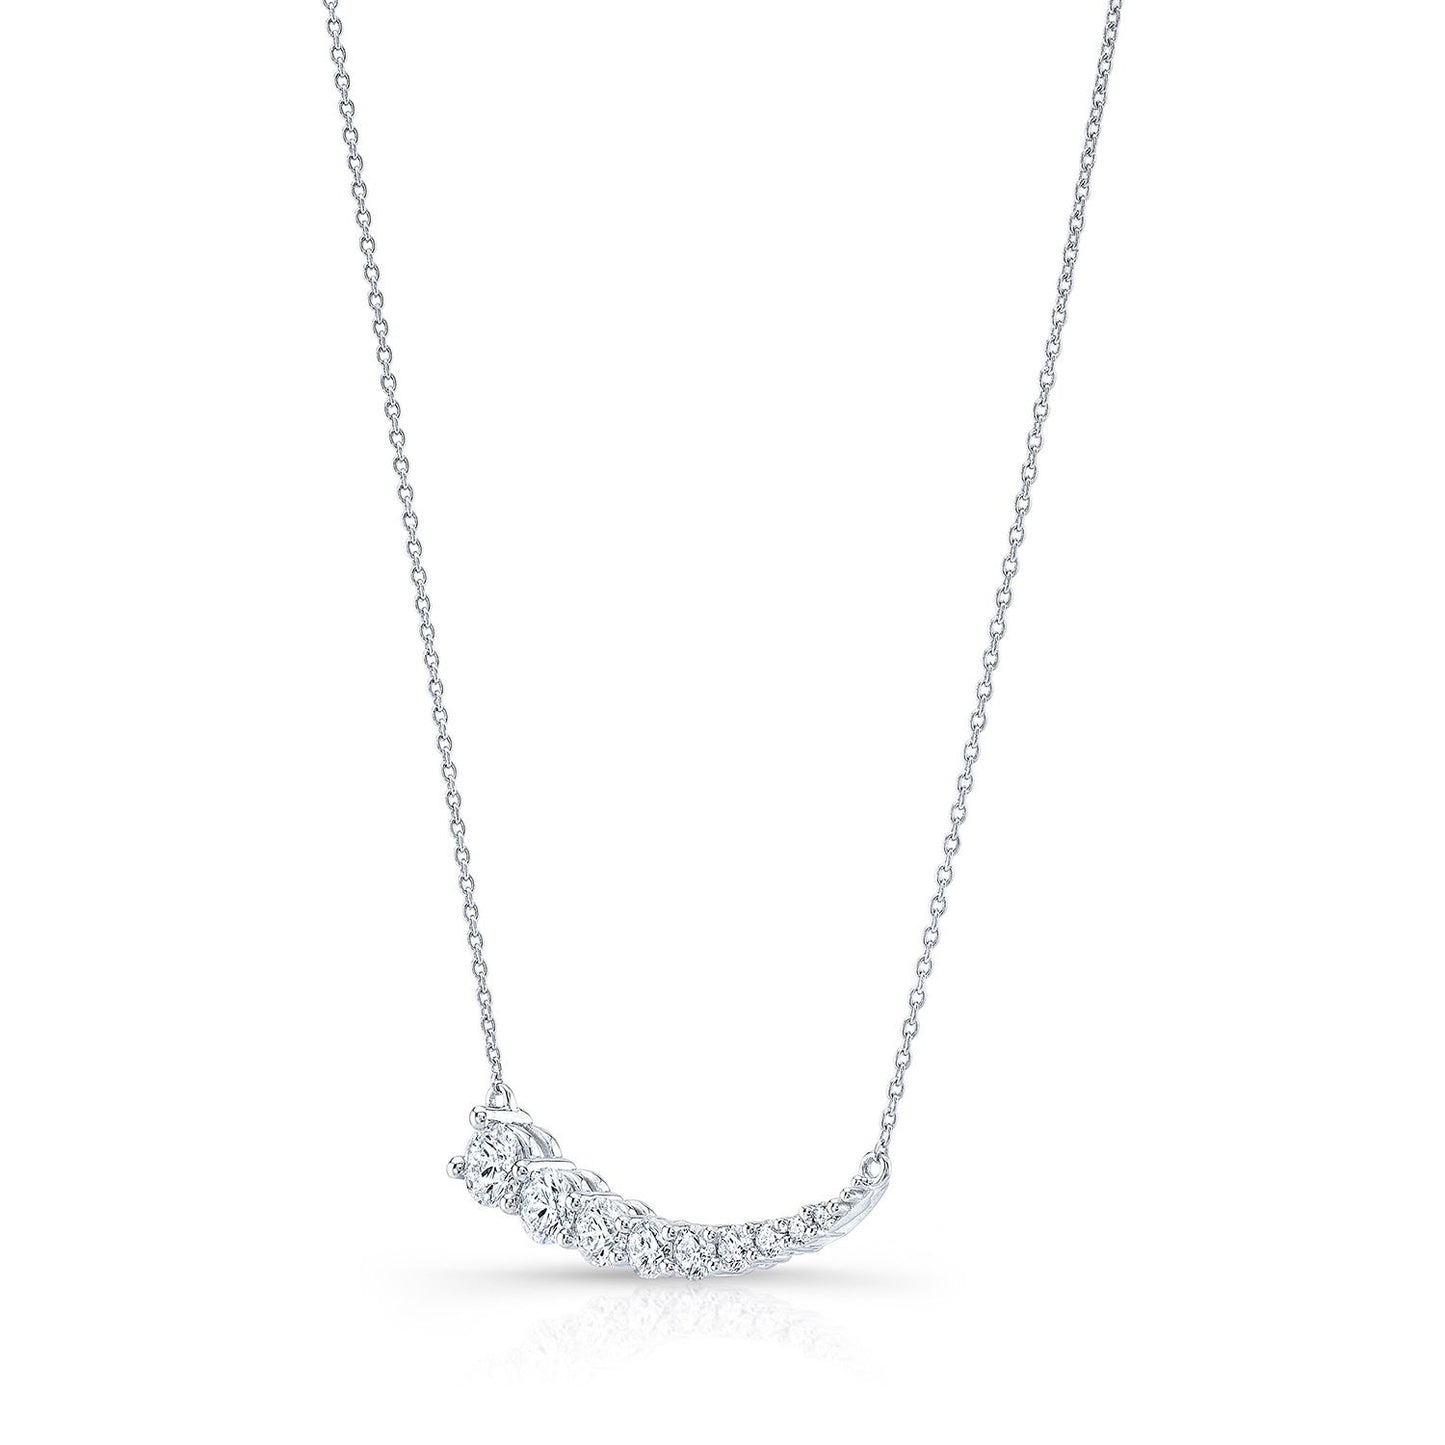 Diamond Round Graduated Prong-set Comet Necklace In 14k White Gold